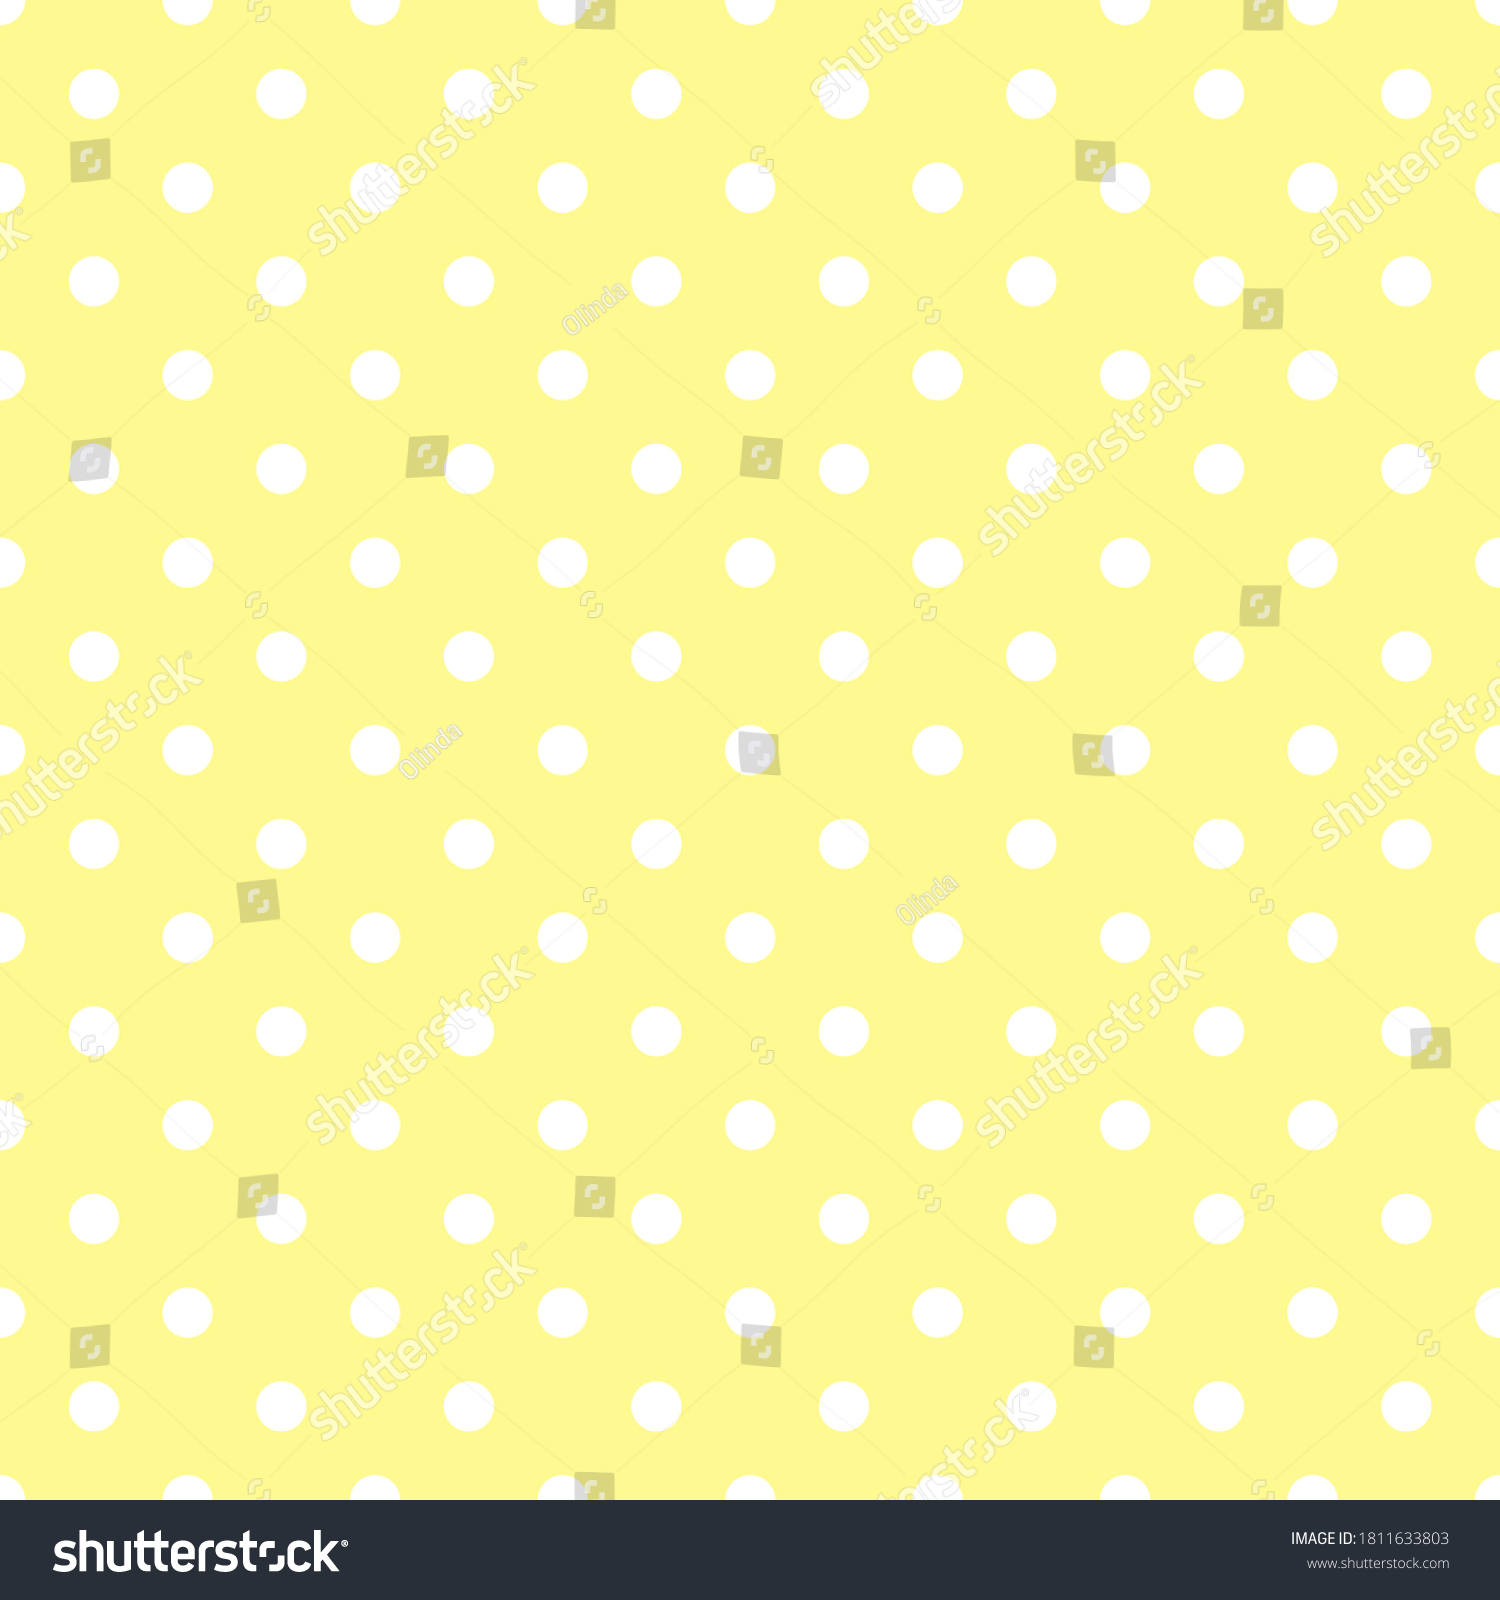 SVG of Seamless pattern white small polka dots on pastel yellow background. Elegant print for fabric textile gift paper scrapbook wallpaper kids clothes nursery decor svg